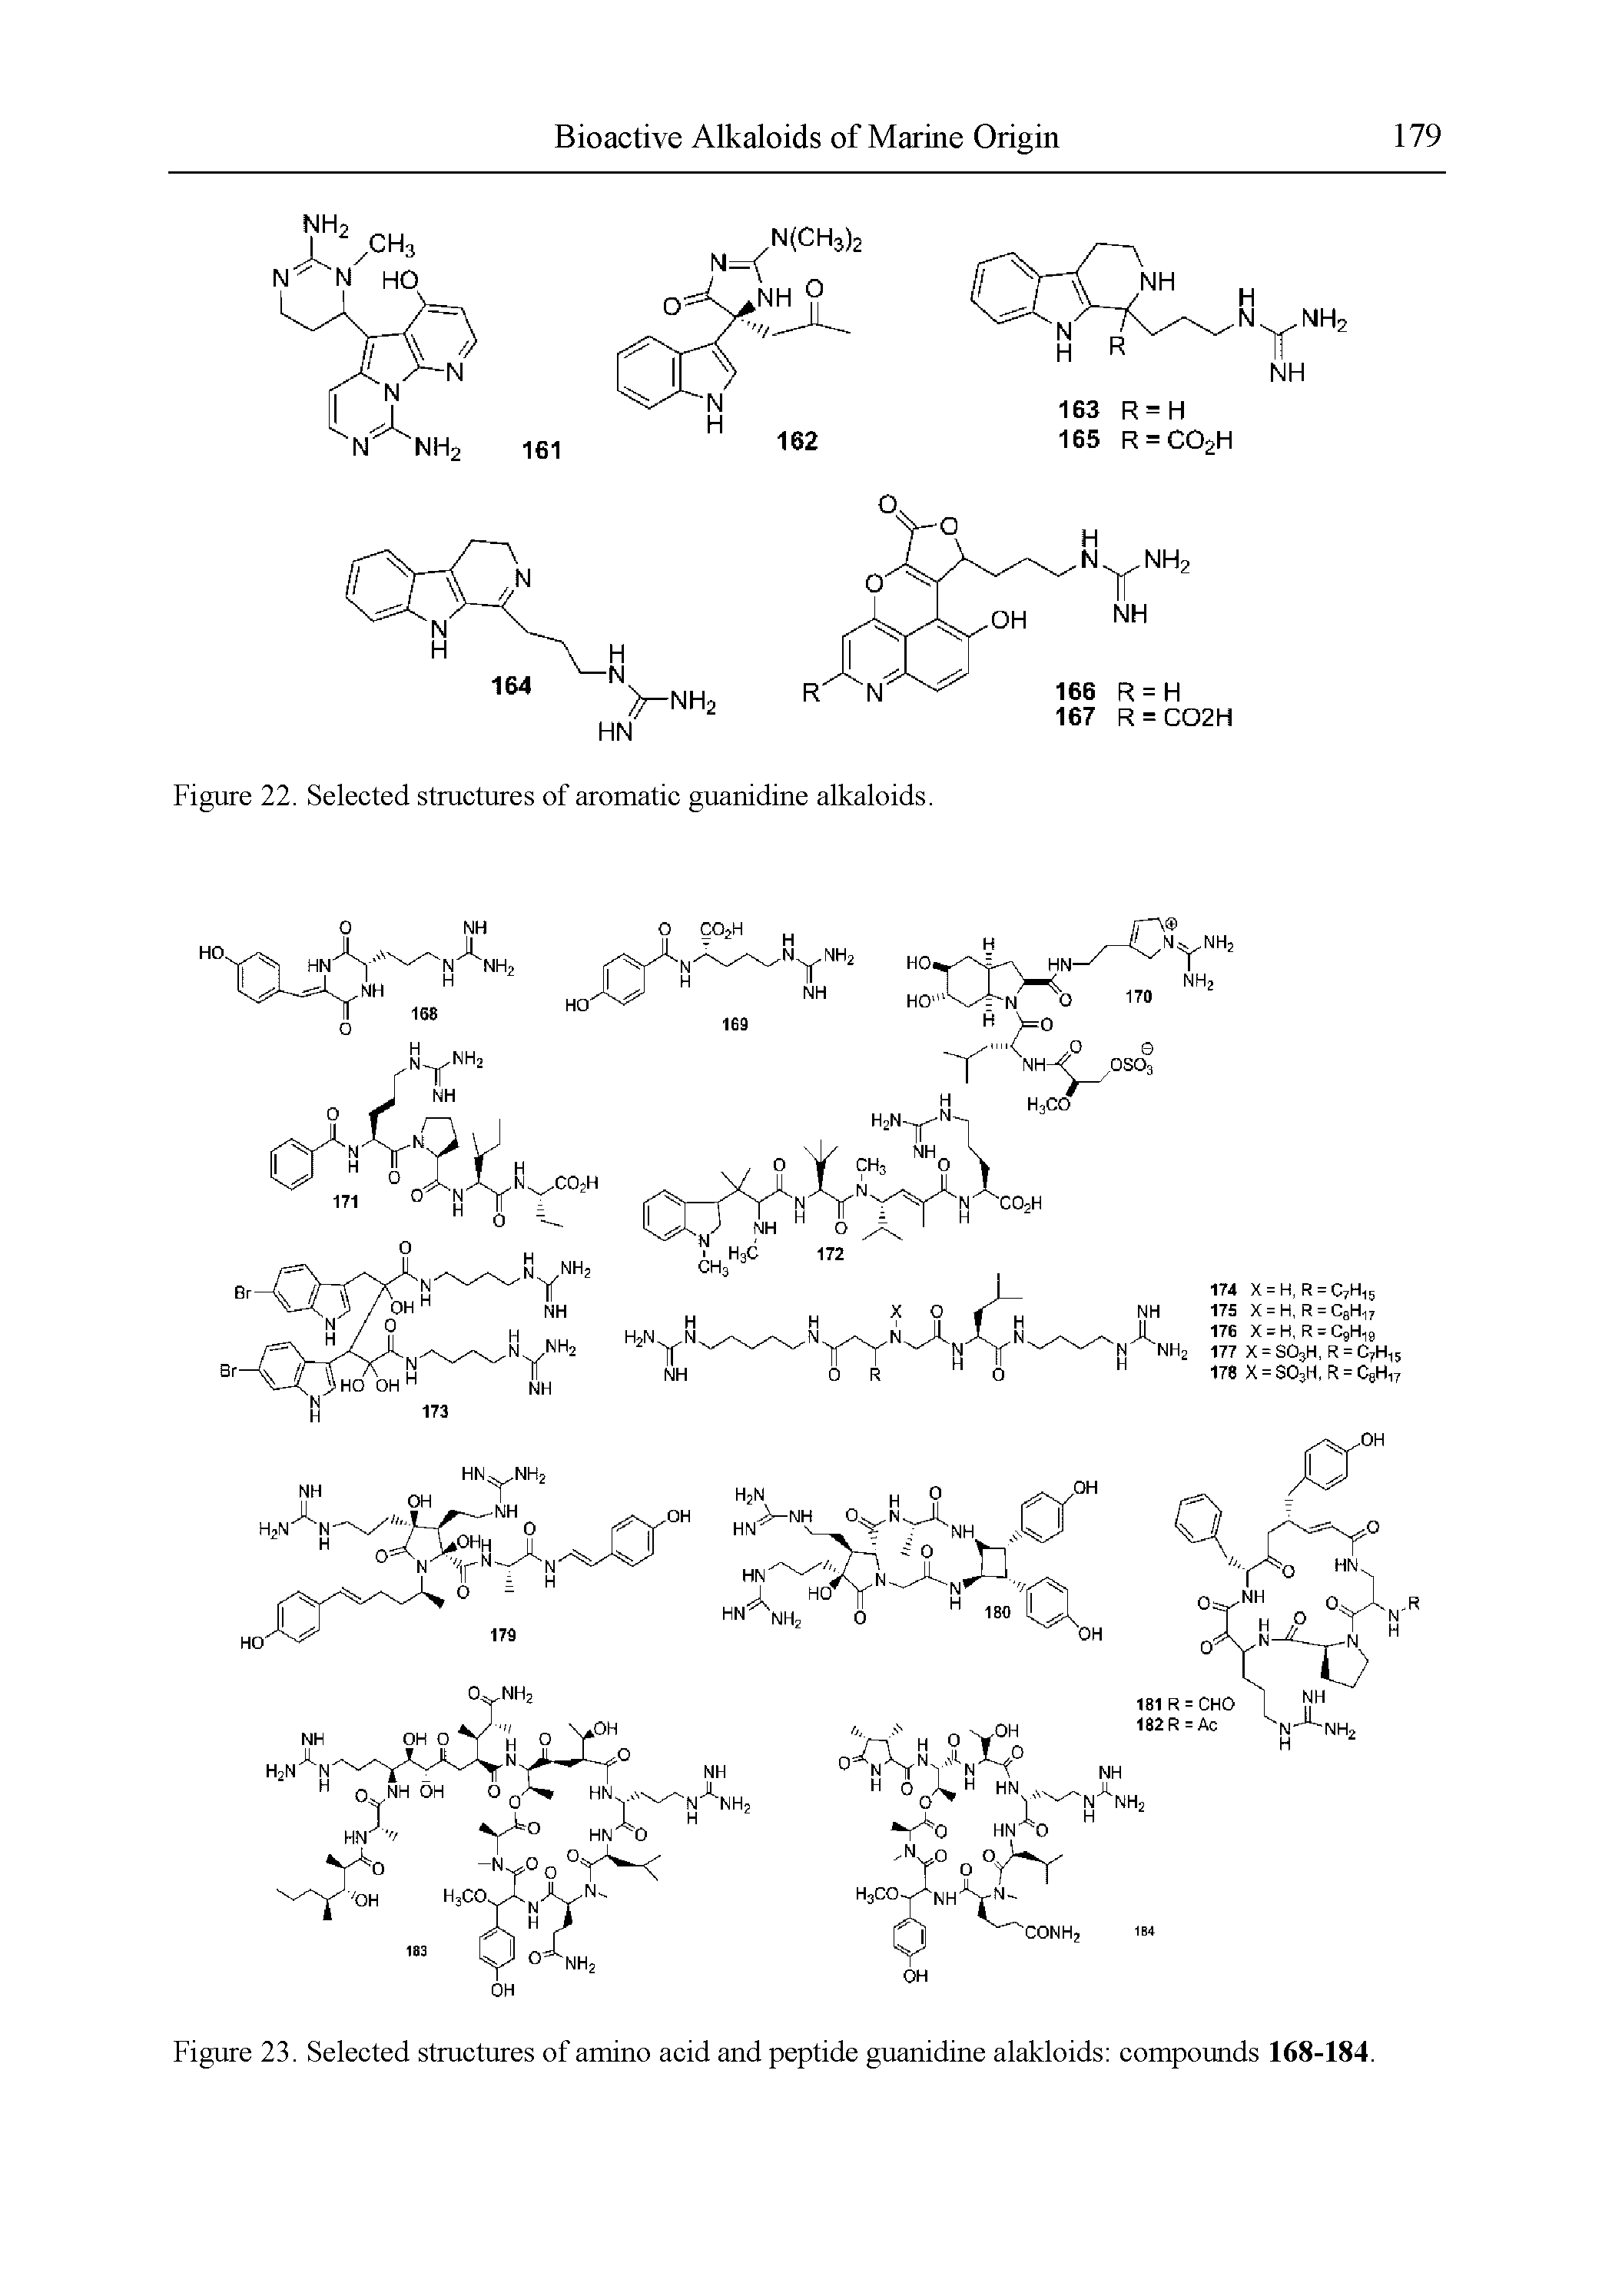 Figure 23. Selected structures of amino acid and peptide guanidine alakloids compounds 168-184.